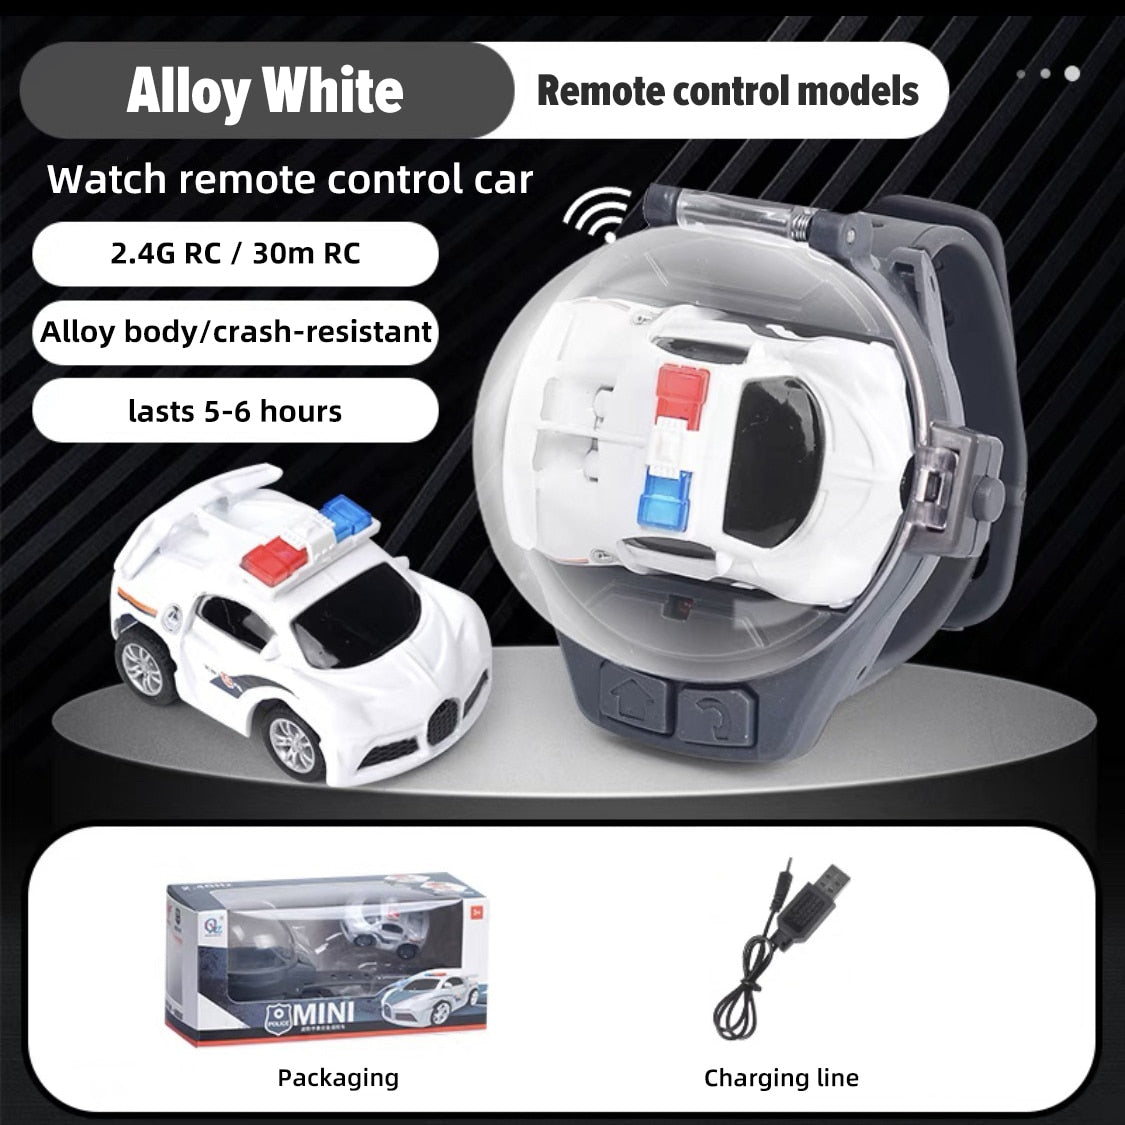 Remote Control Car Watch - HOW DO I BUY THIS Red